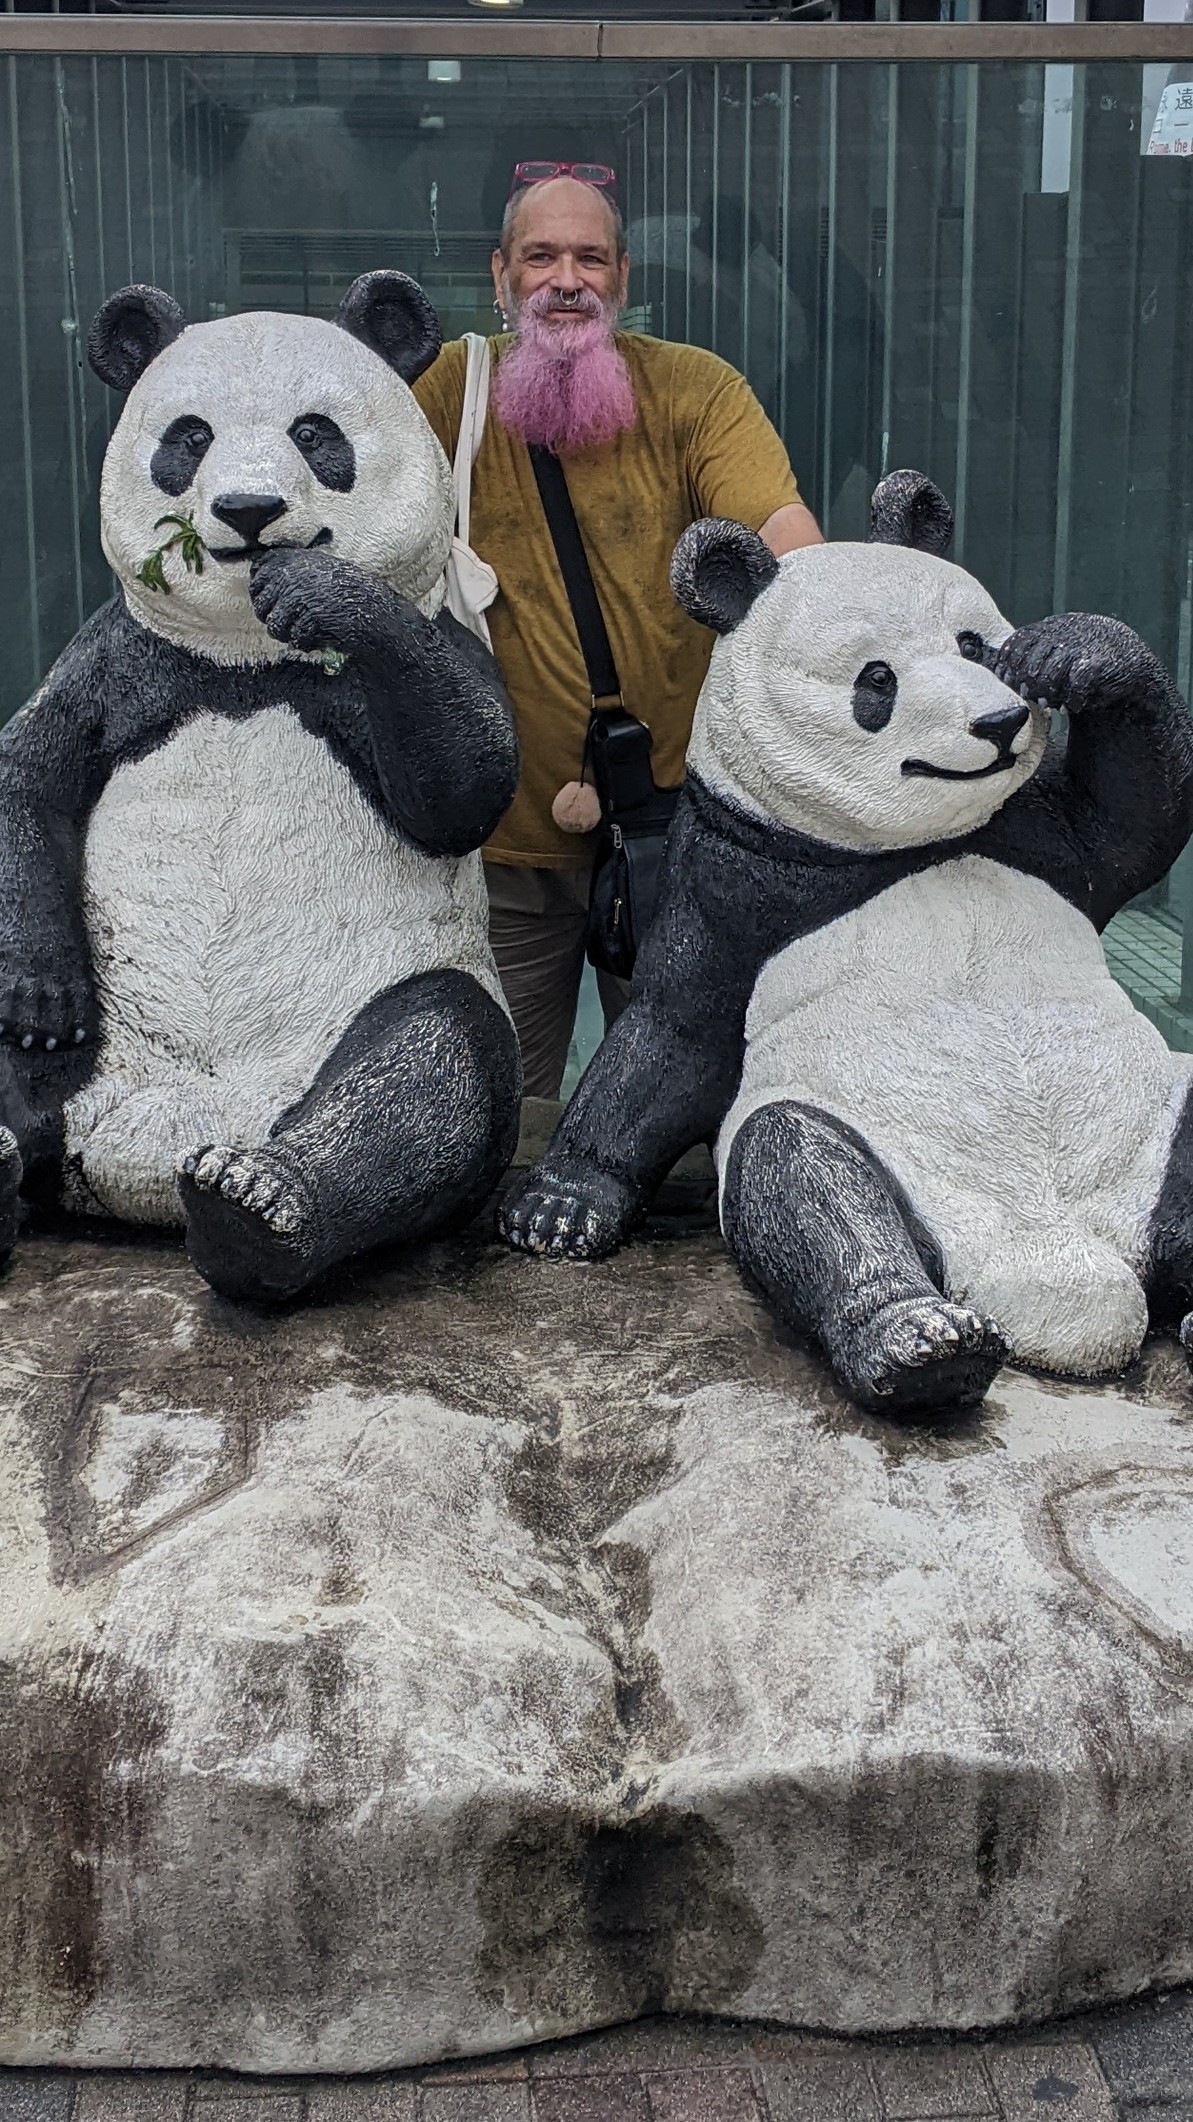 Les behind a statue of two pandas